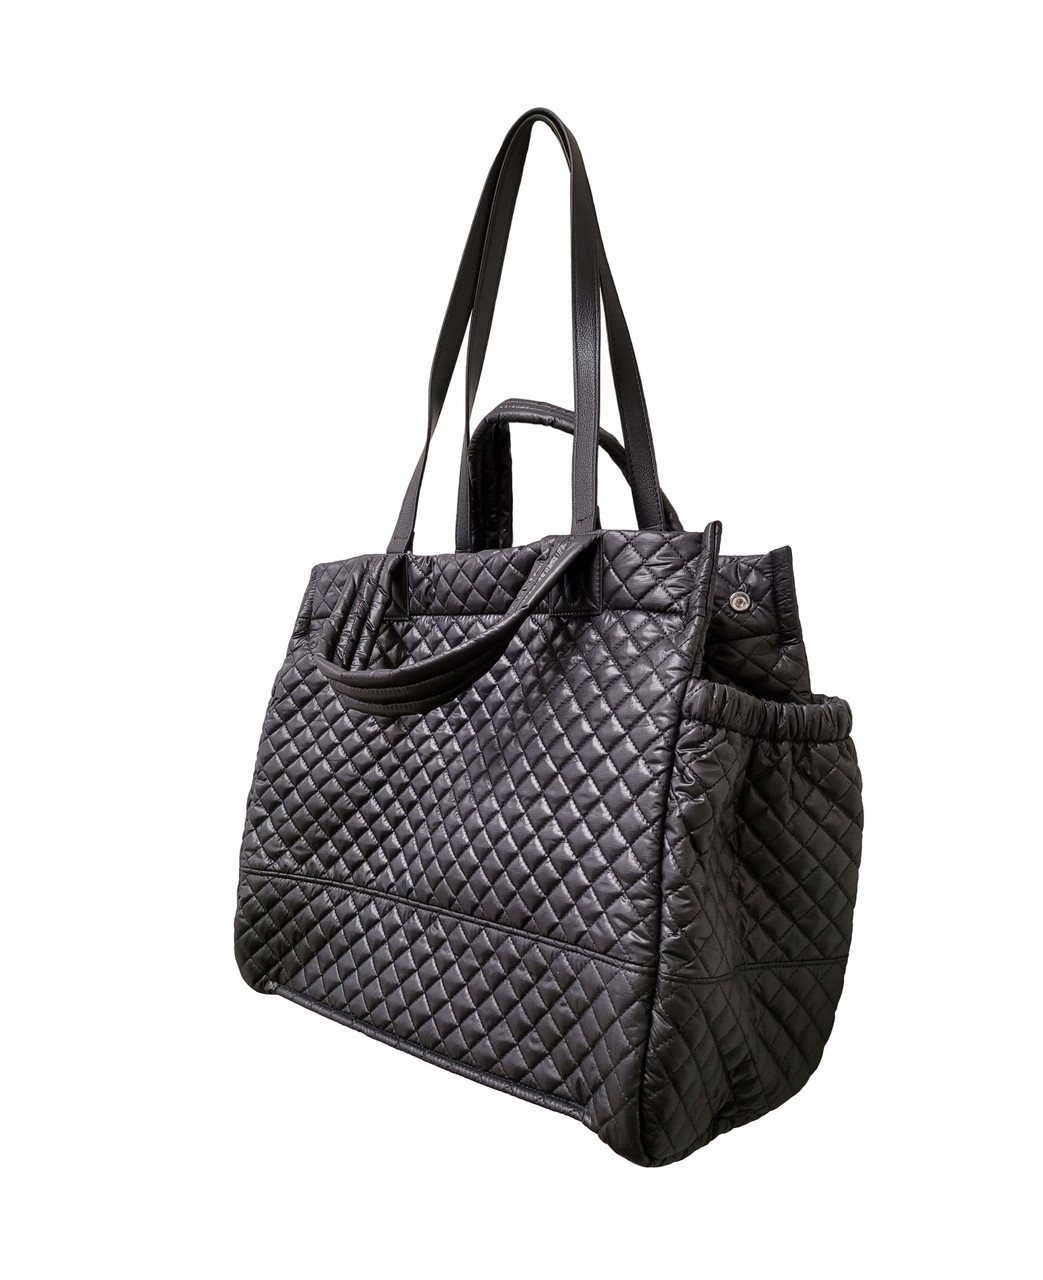 Time Concept Ultra Lightweight Quilted Shoulder Bag - Camo Navy, Approx.  H13 x W16 x L12 - Single Strap Travel Tote